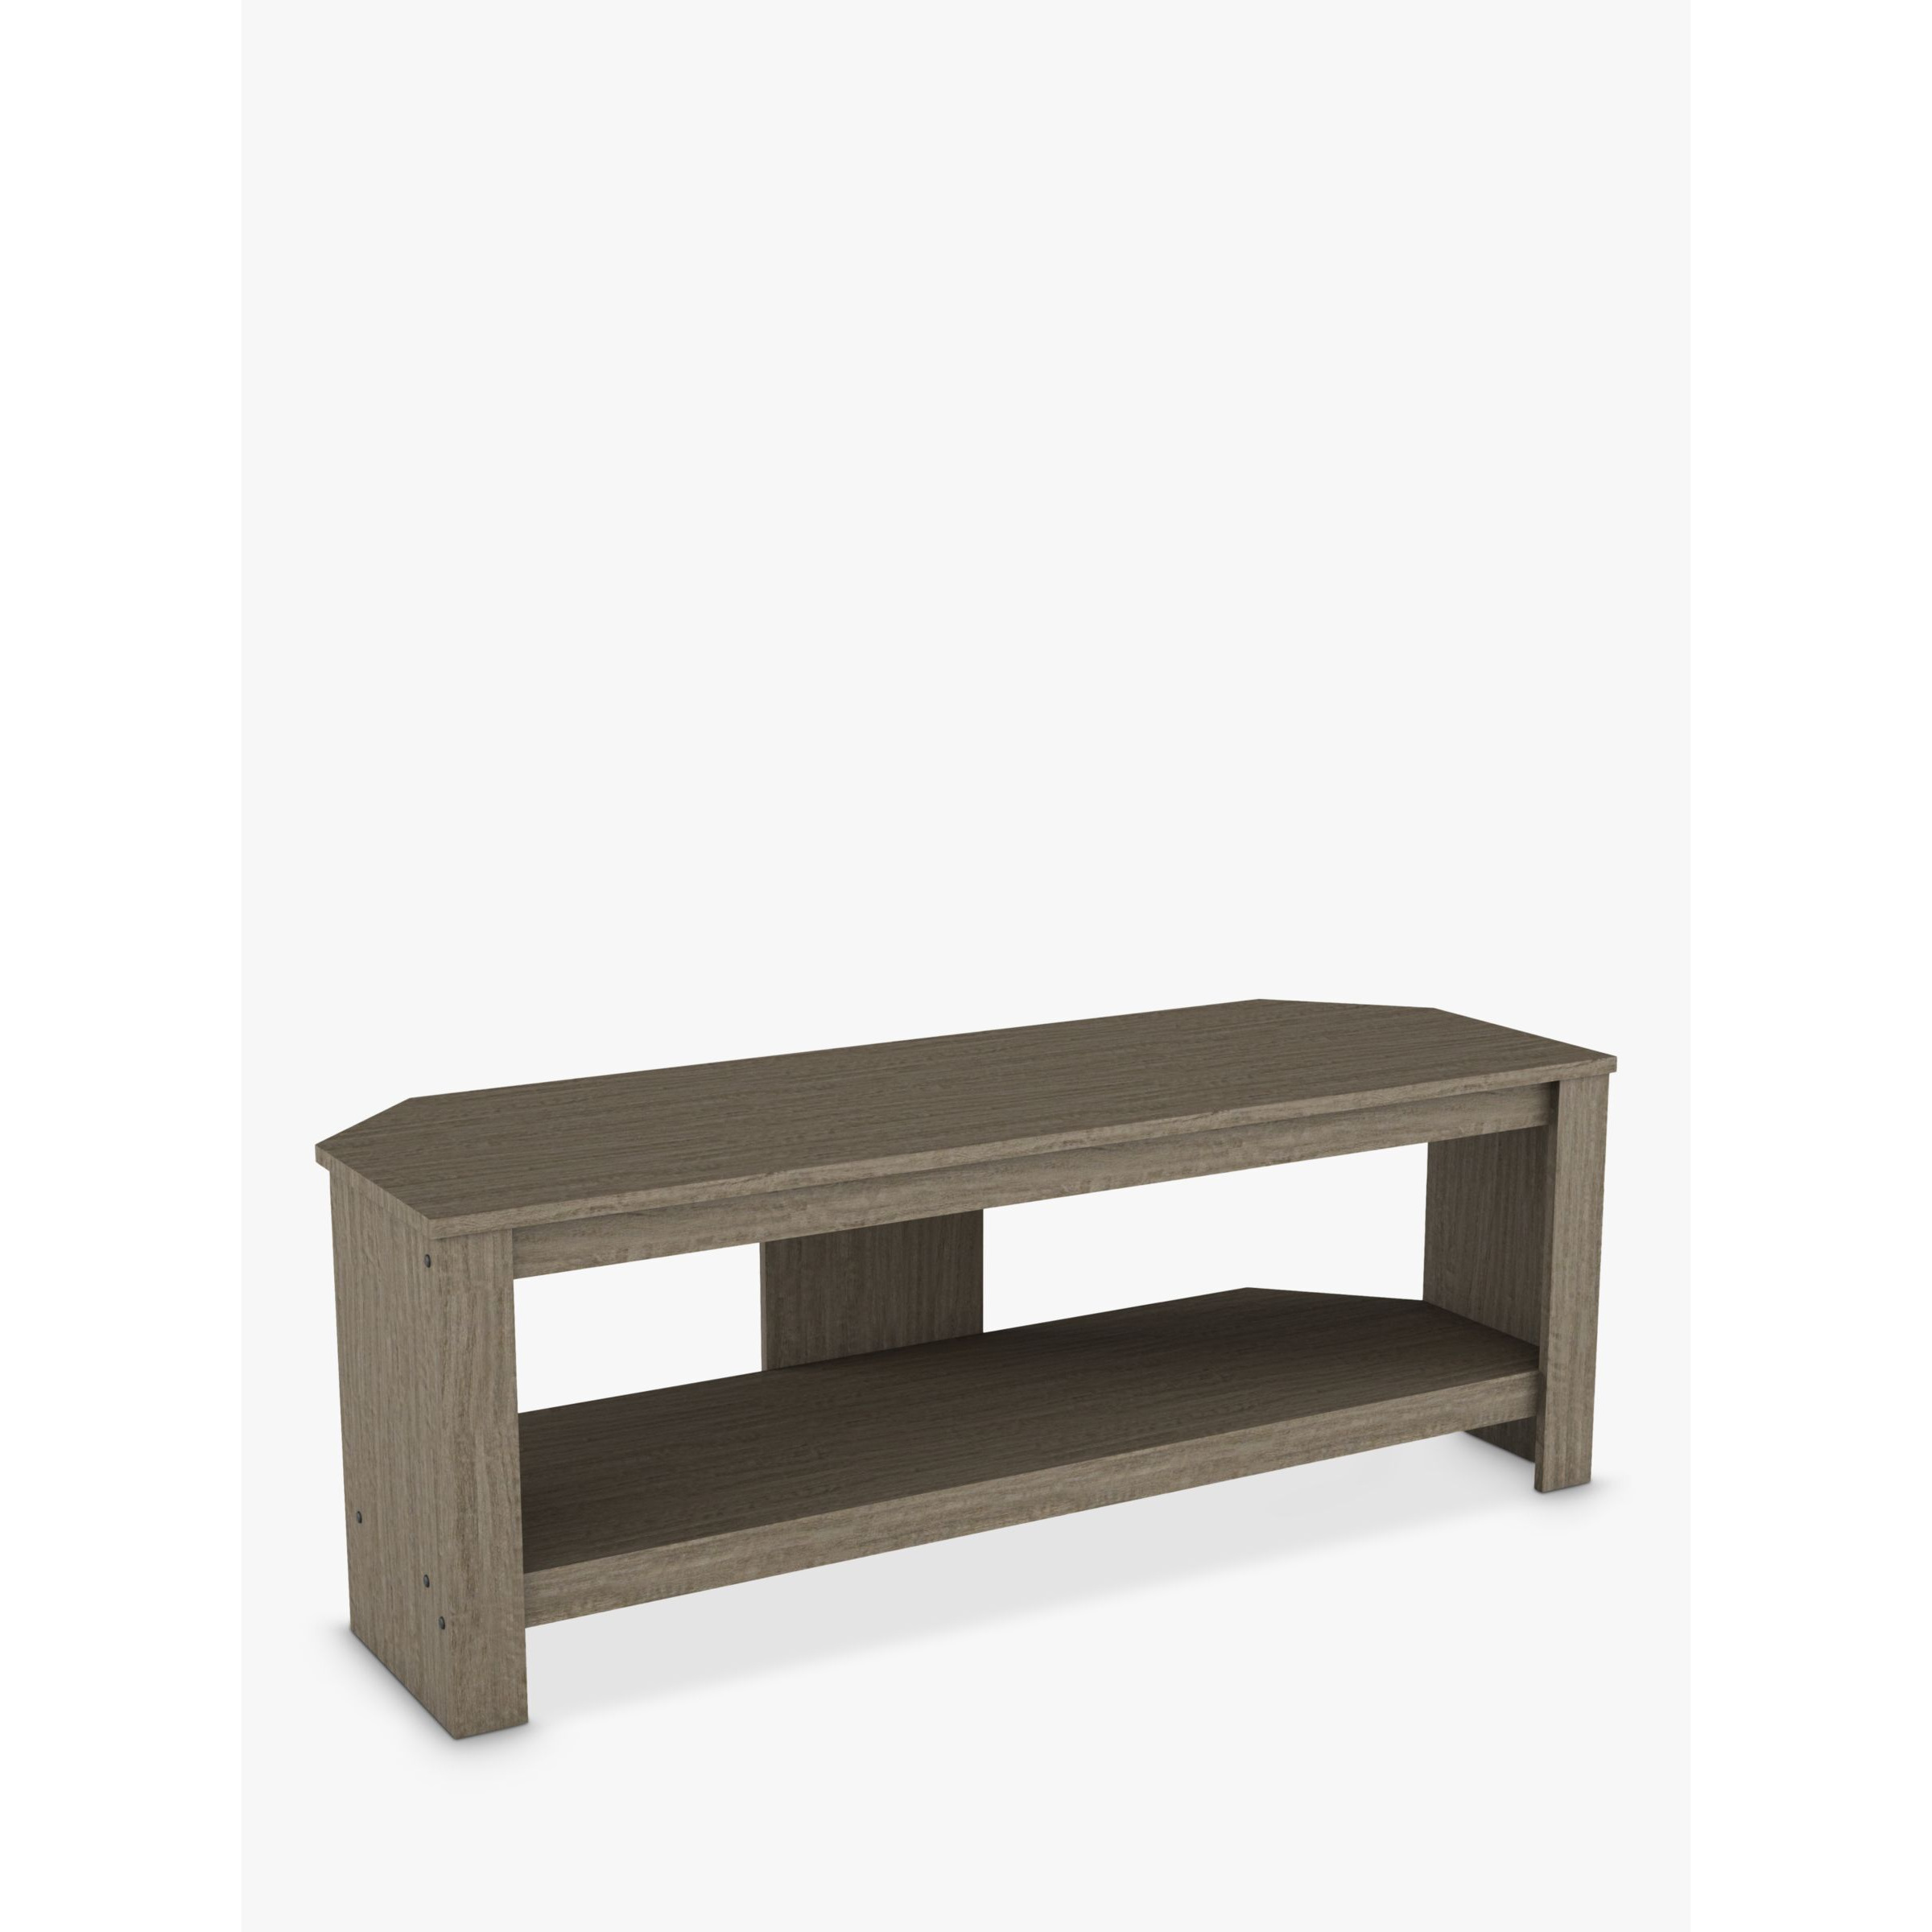 "AVF Calibre 115 TV Stand for TVs up to 55""" - image 1